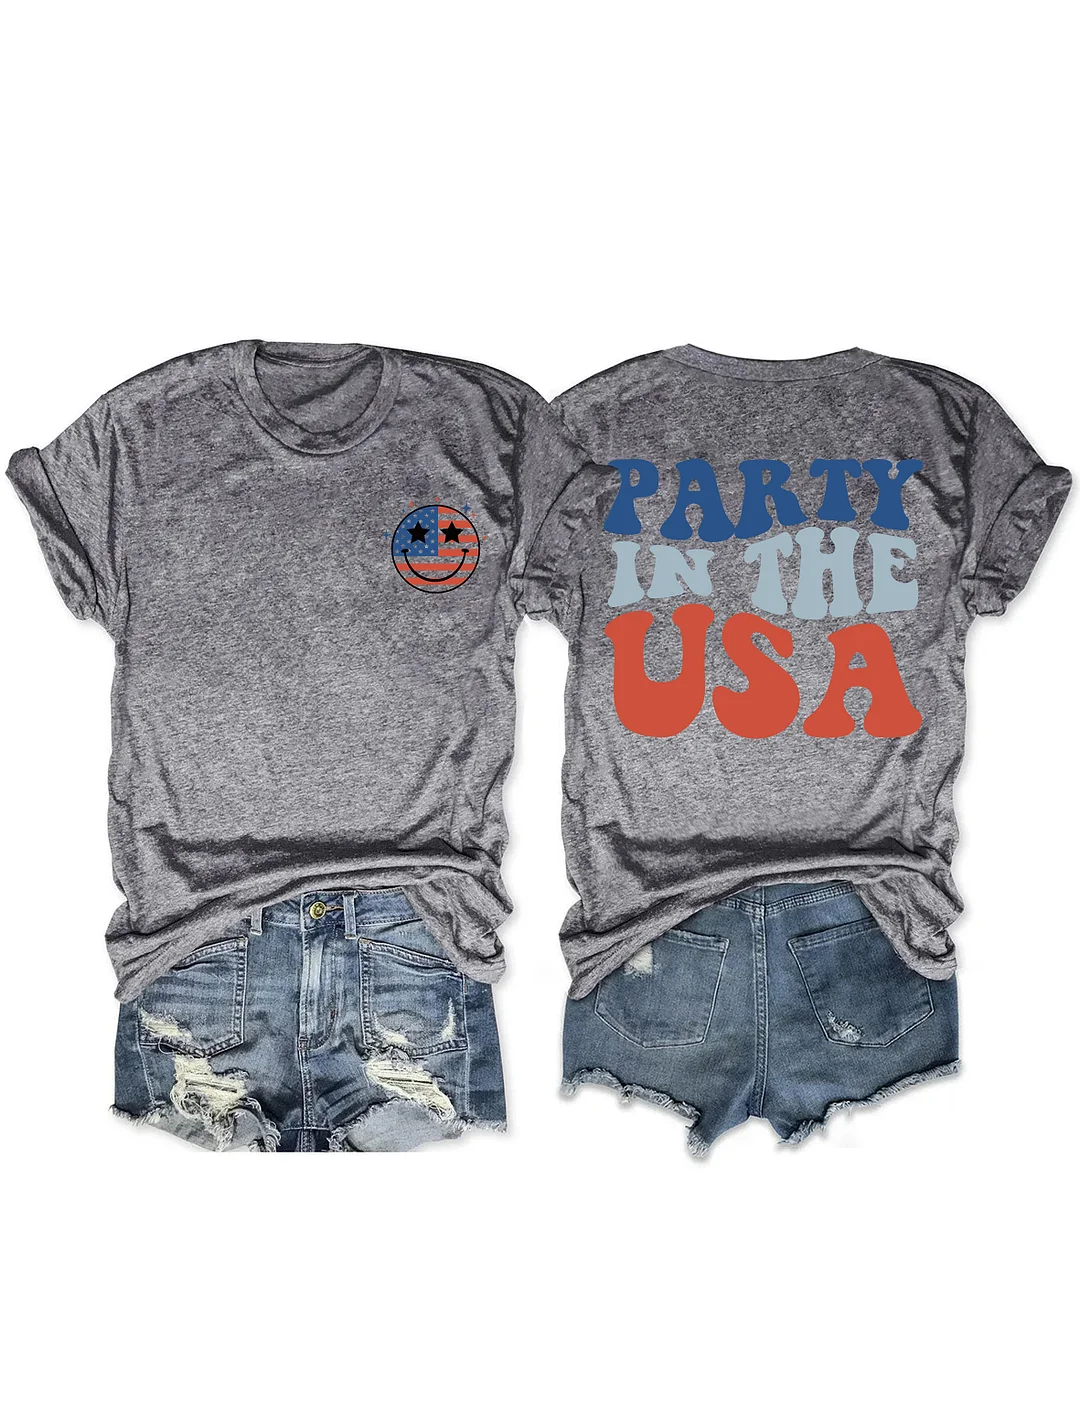 Retro Party in The USA T-shirt